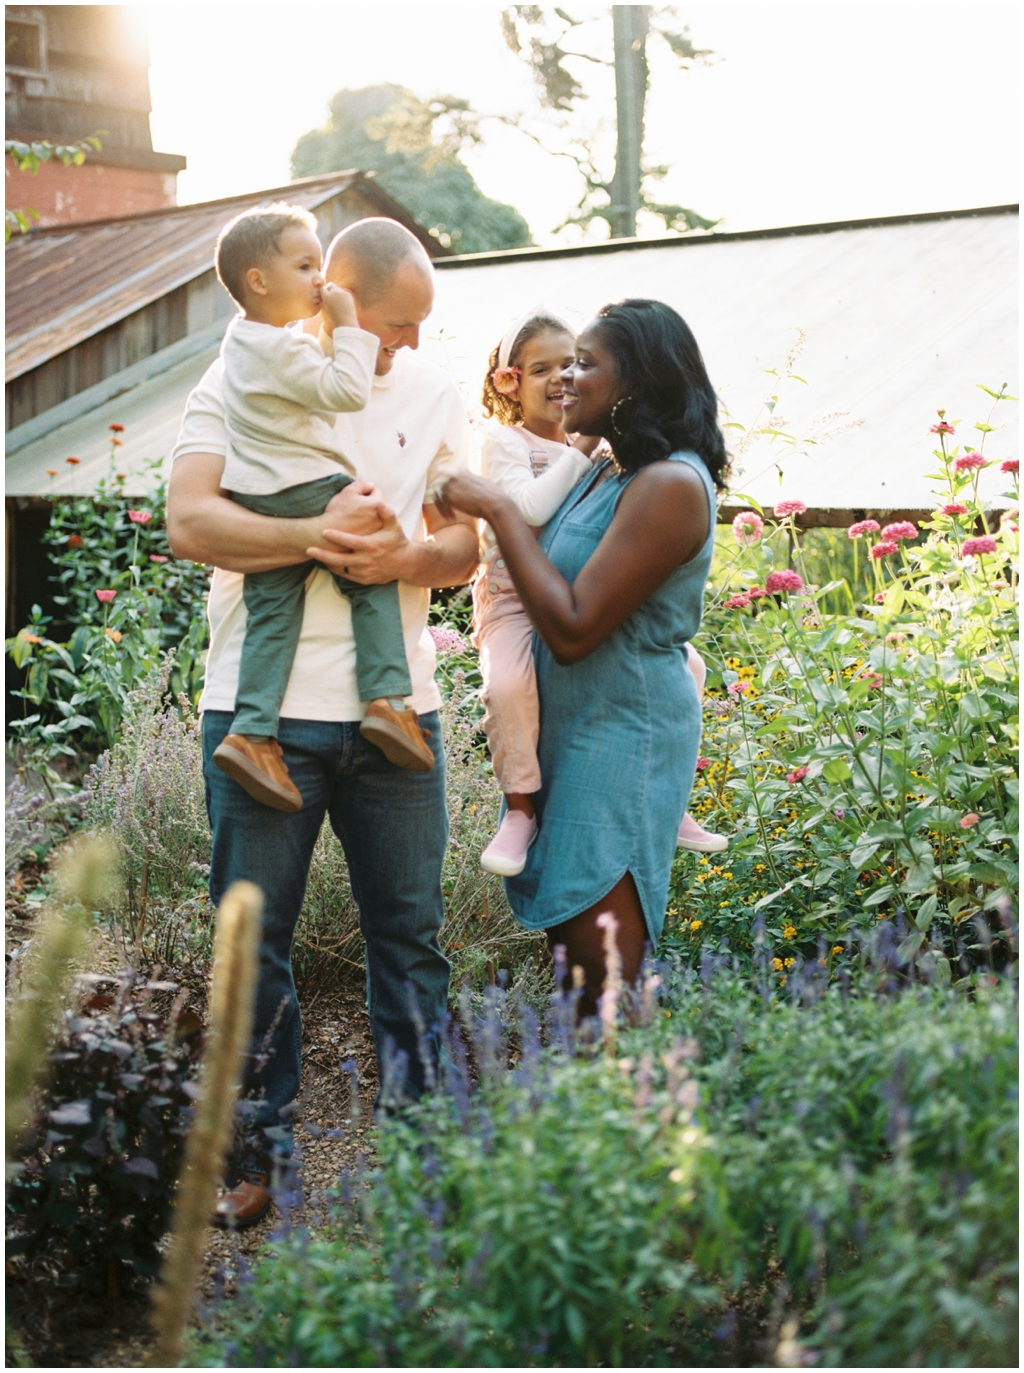 A dreamy and whimsical lifestyle garden family session photographed in Knoxville, TN by Holly Michon Photography